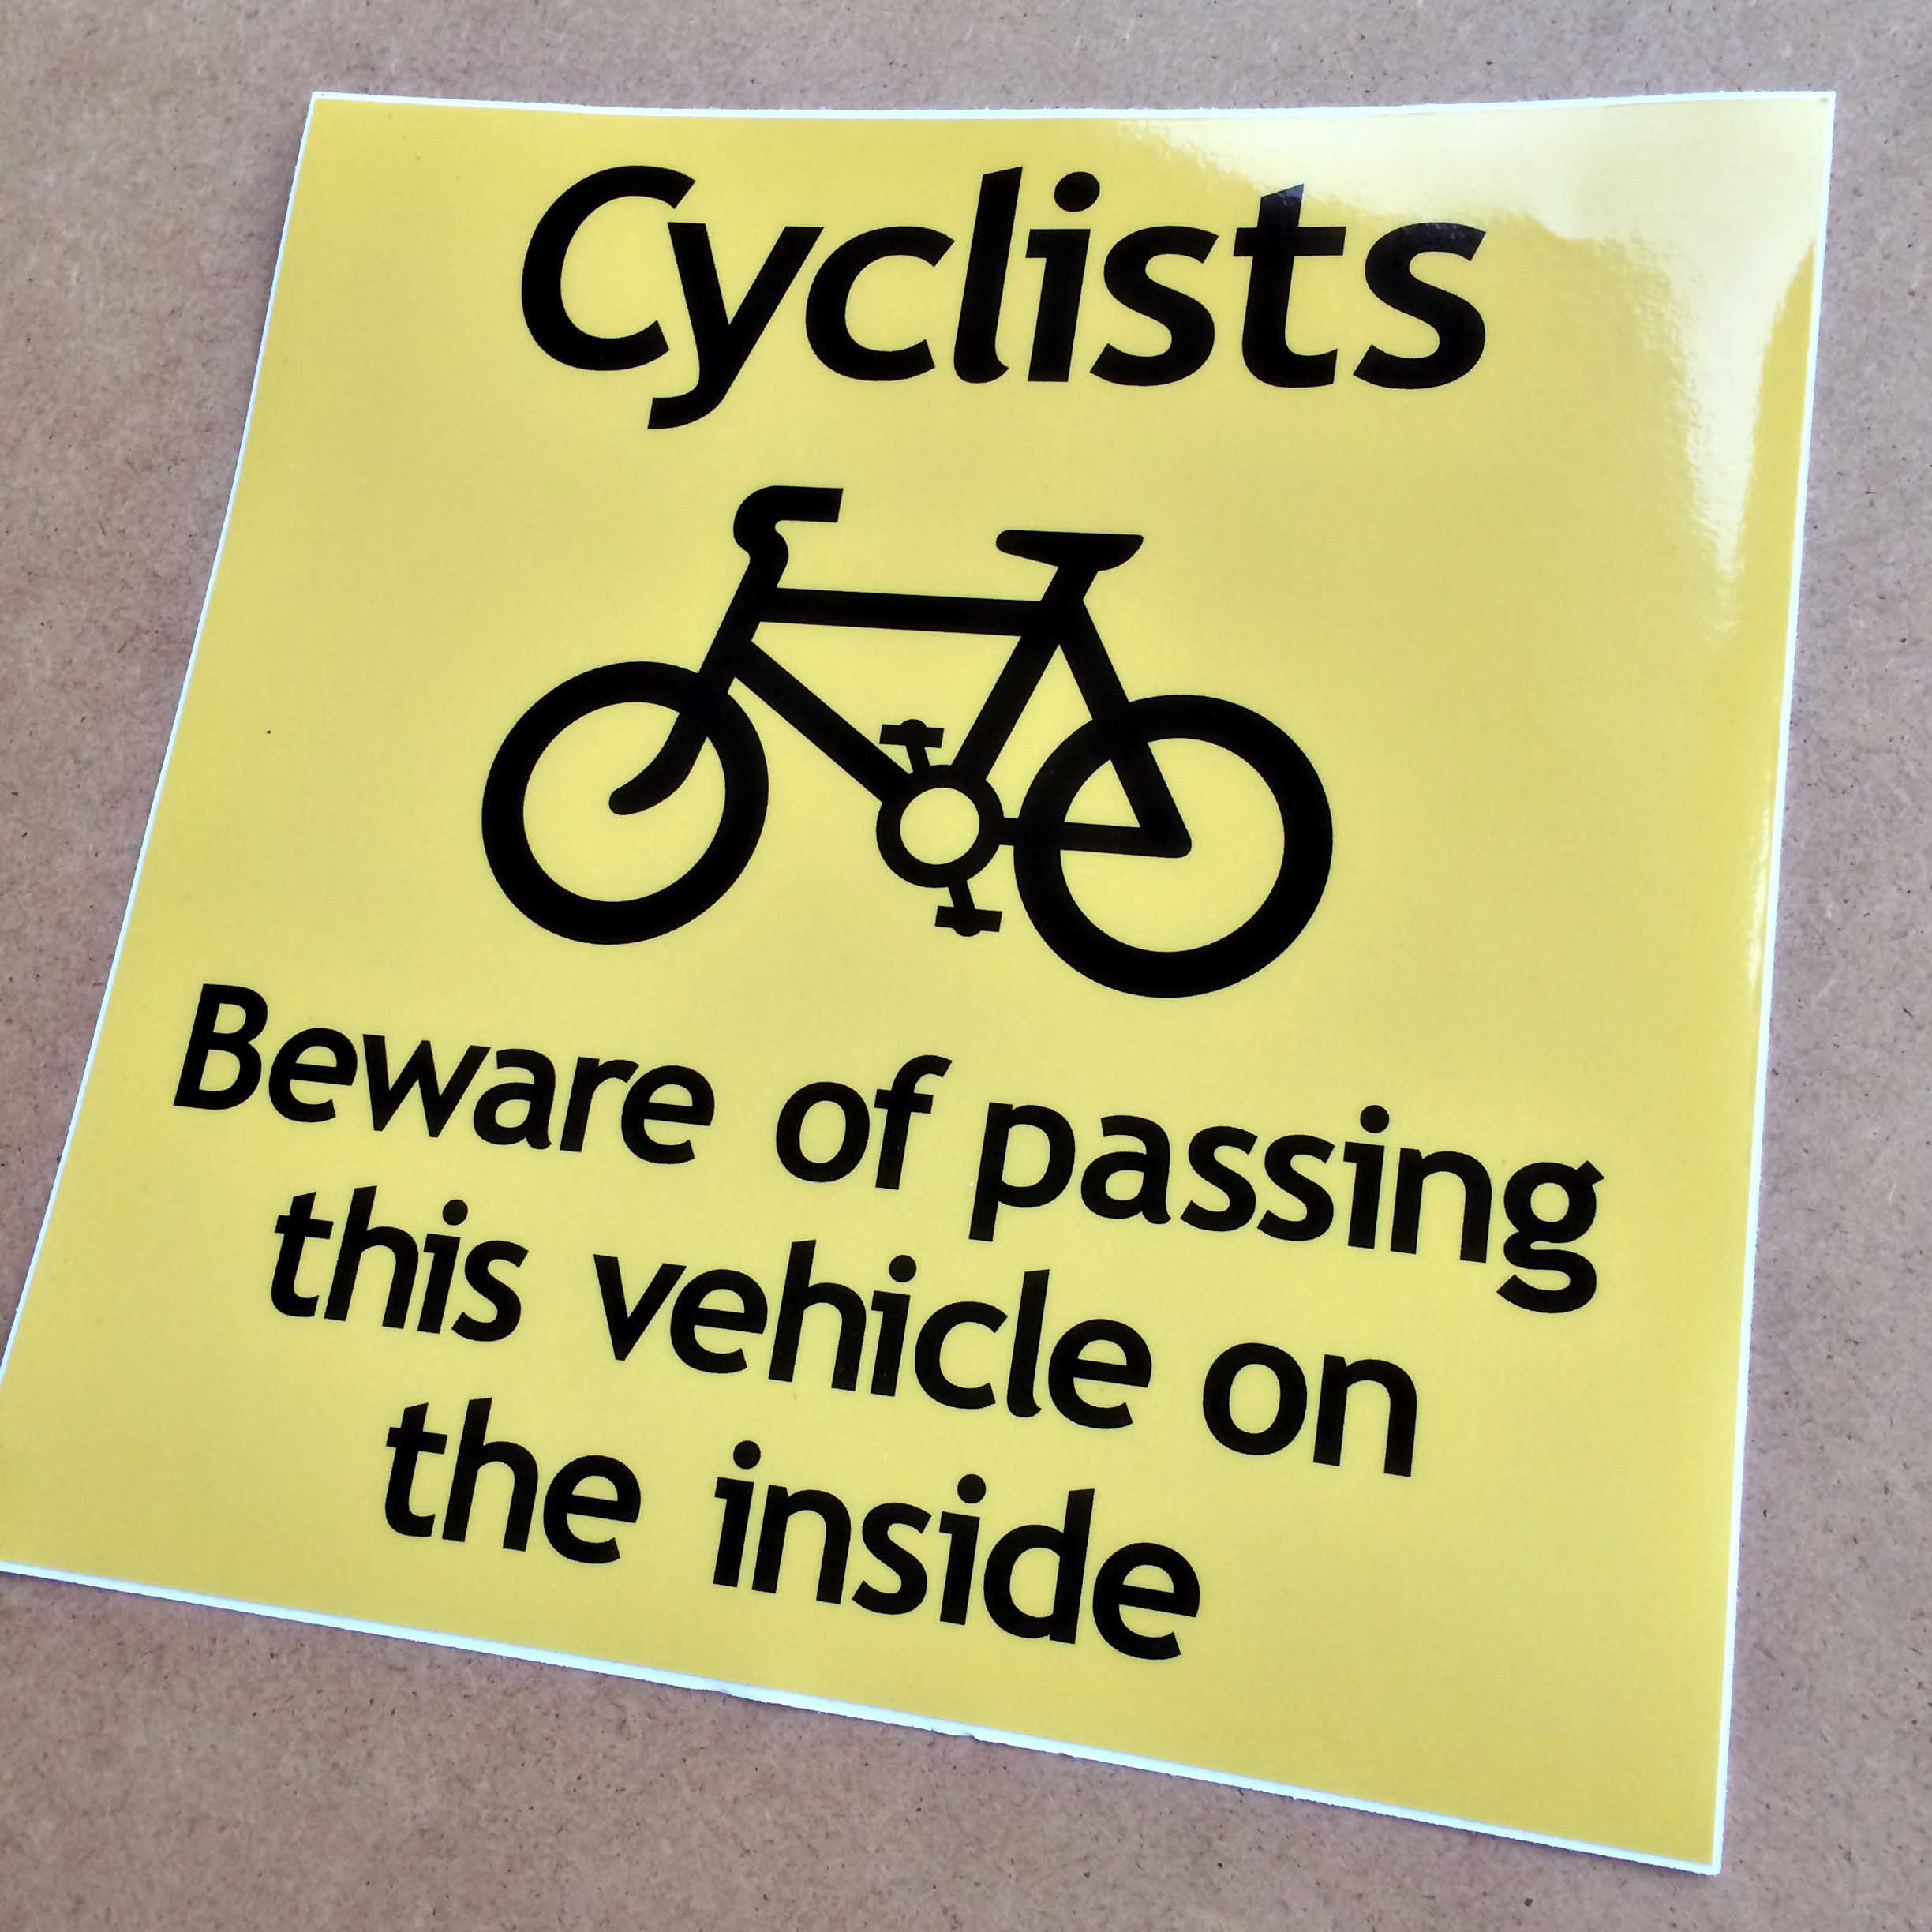 Cyclists Beware of passing this vehicle on the inside in black lowercase lettering and a bicycle on a yellow background.